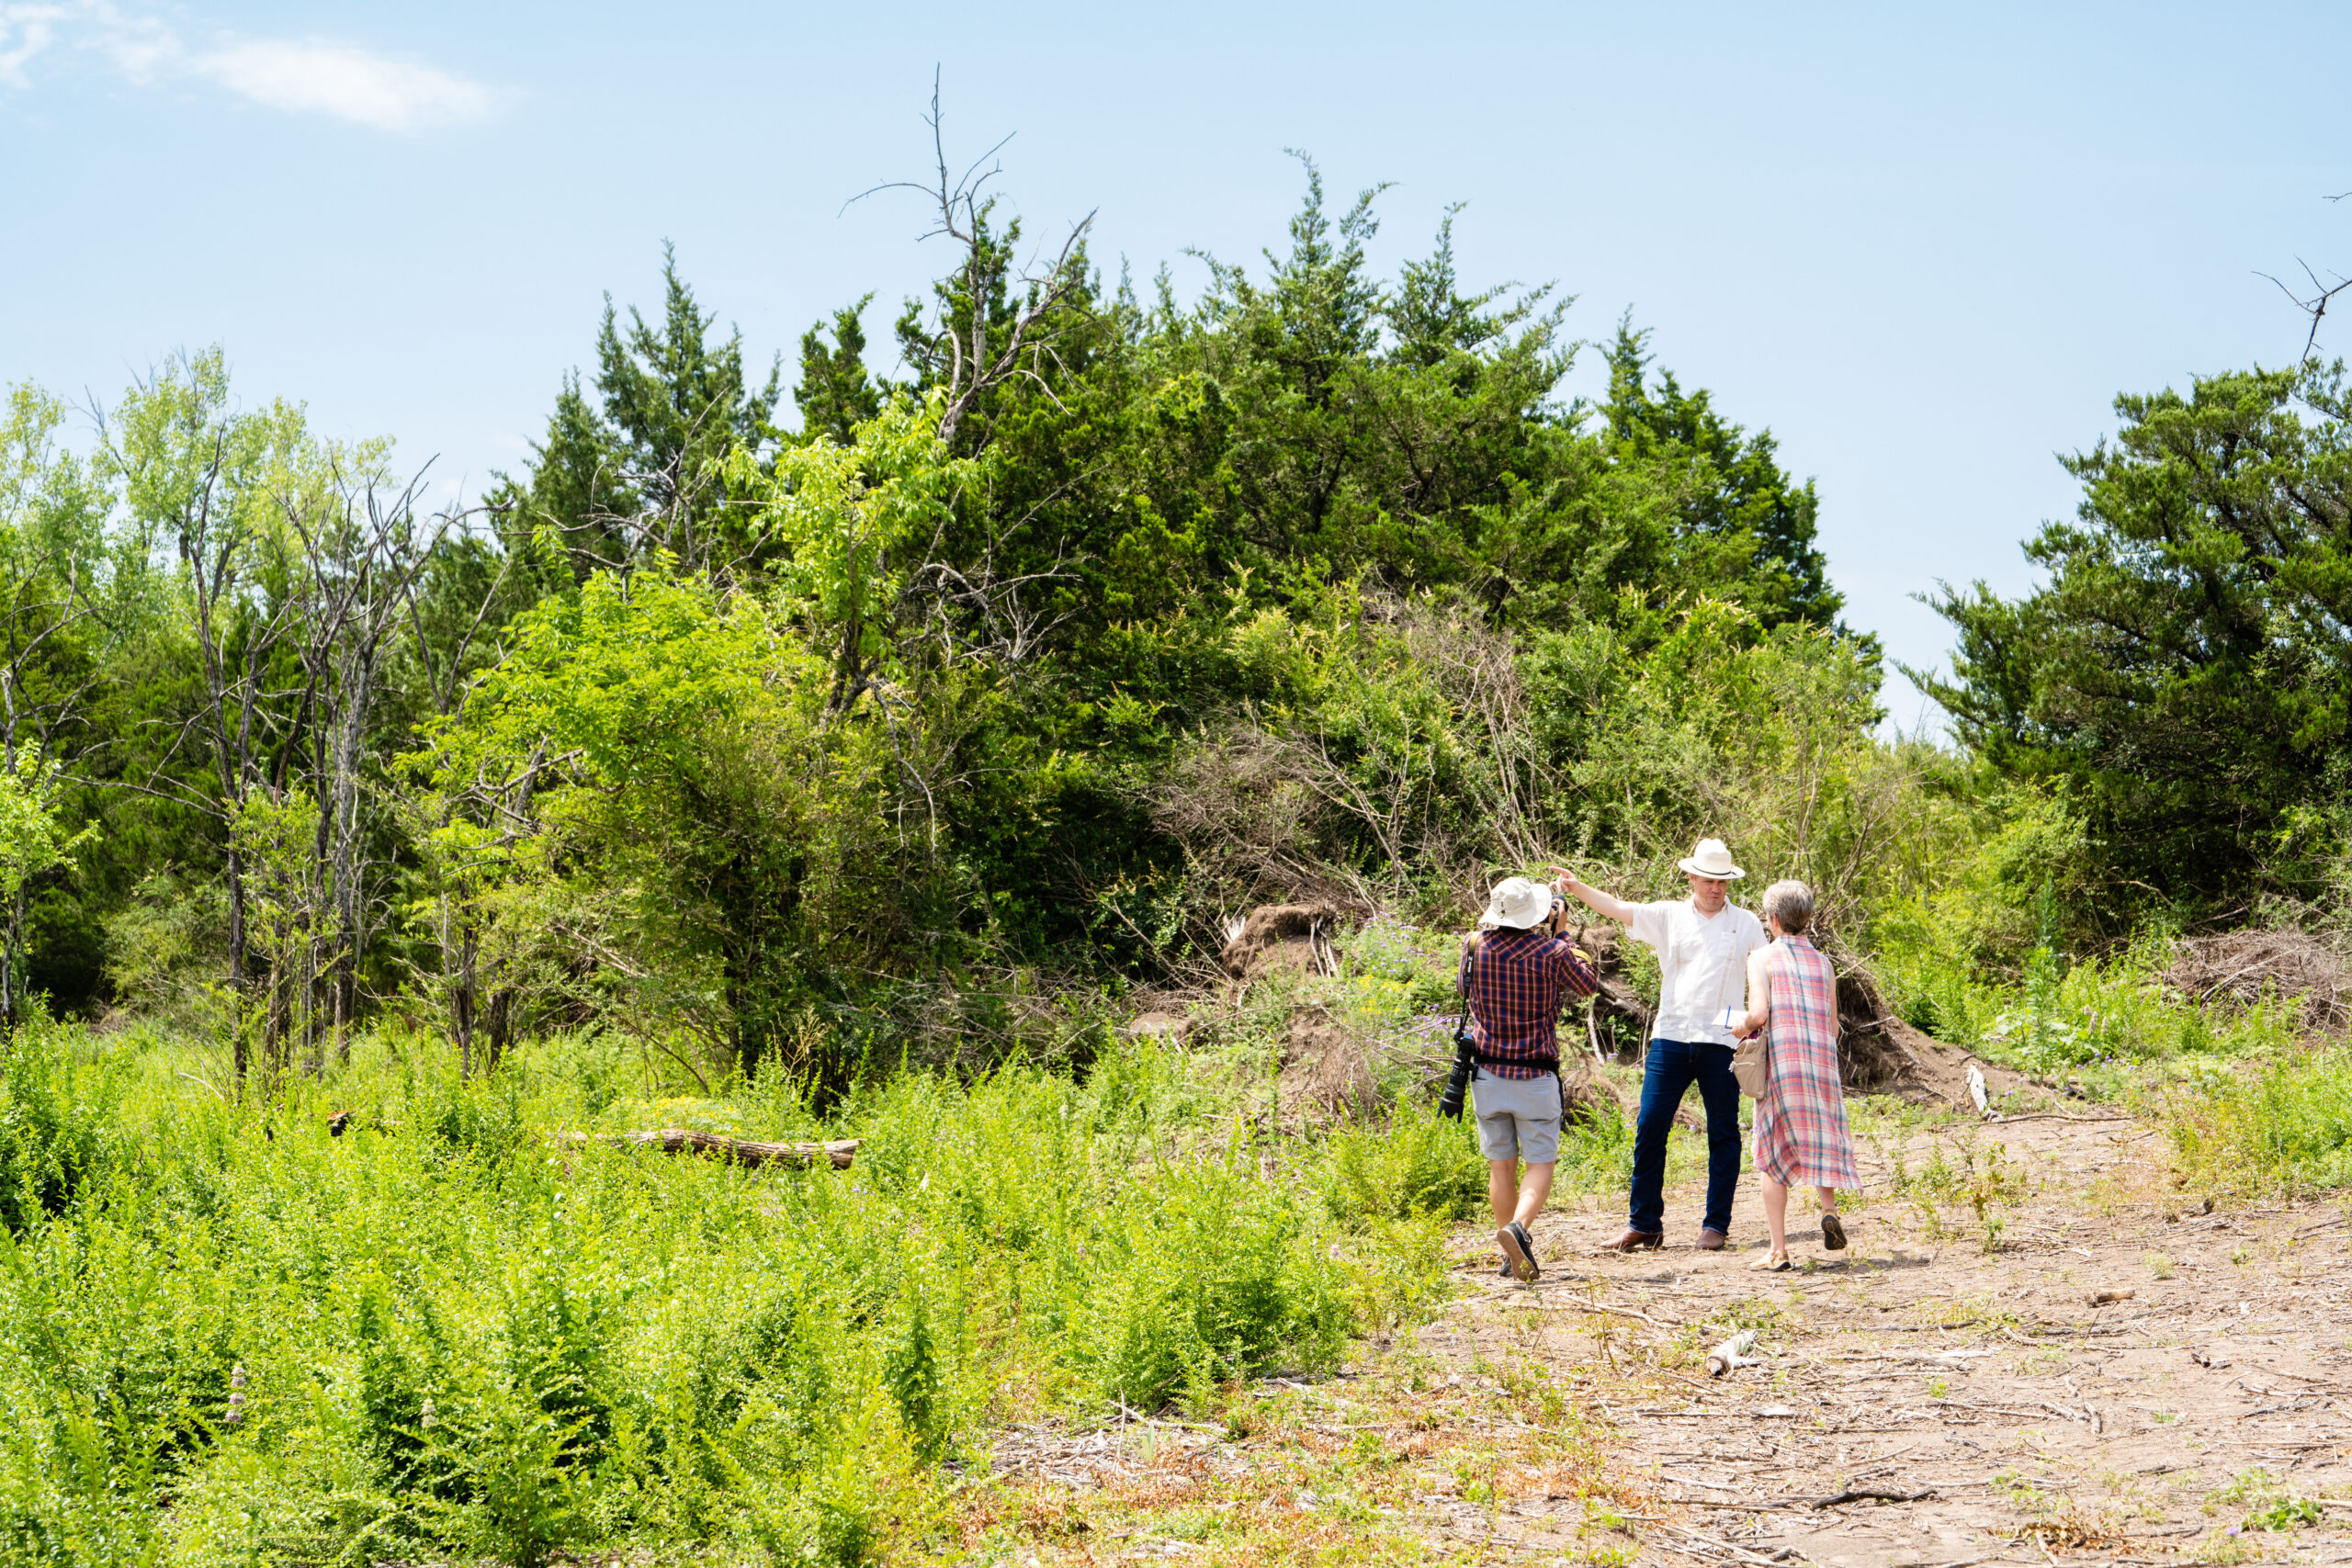 A group of people walking down a dirt path.